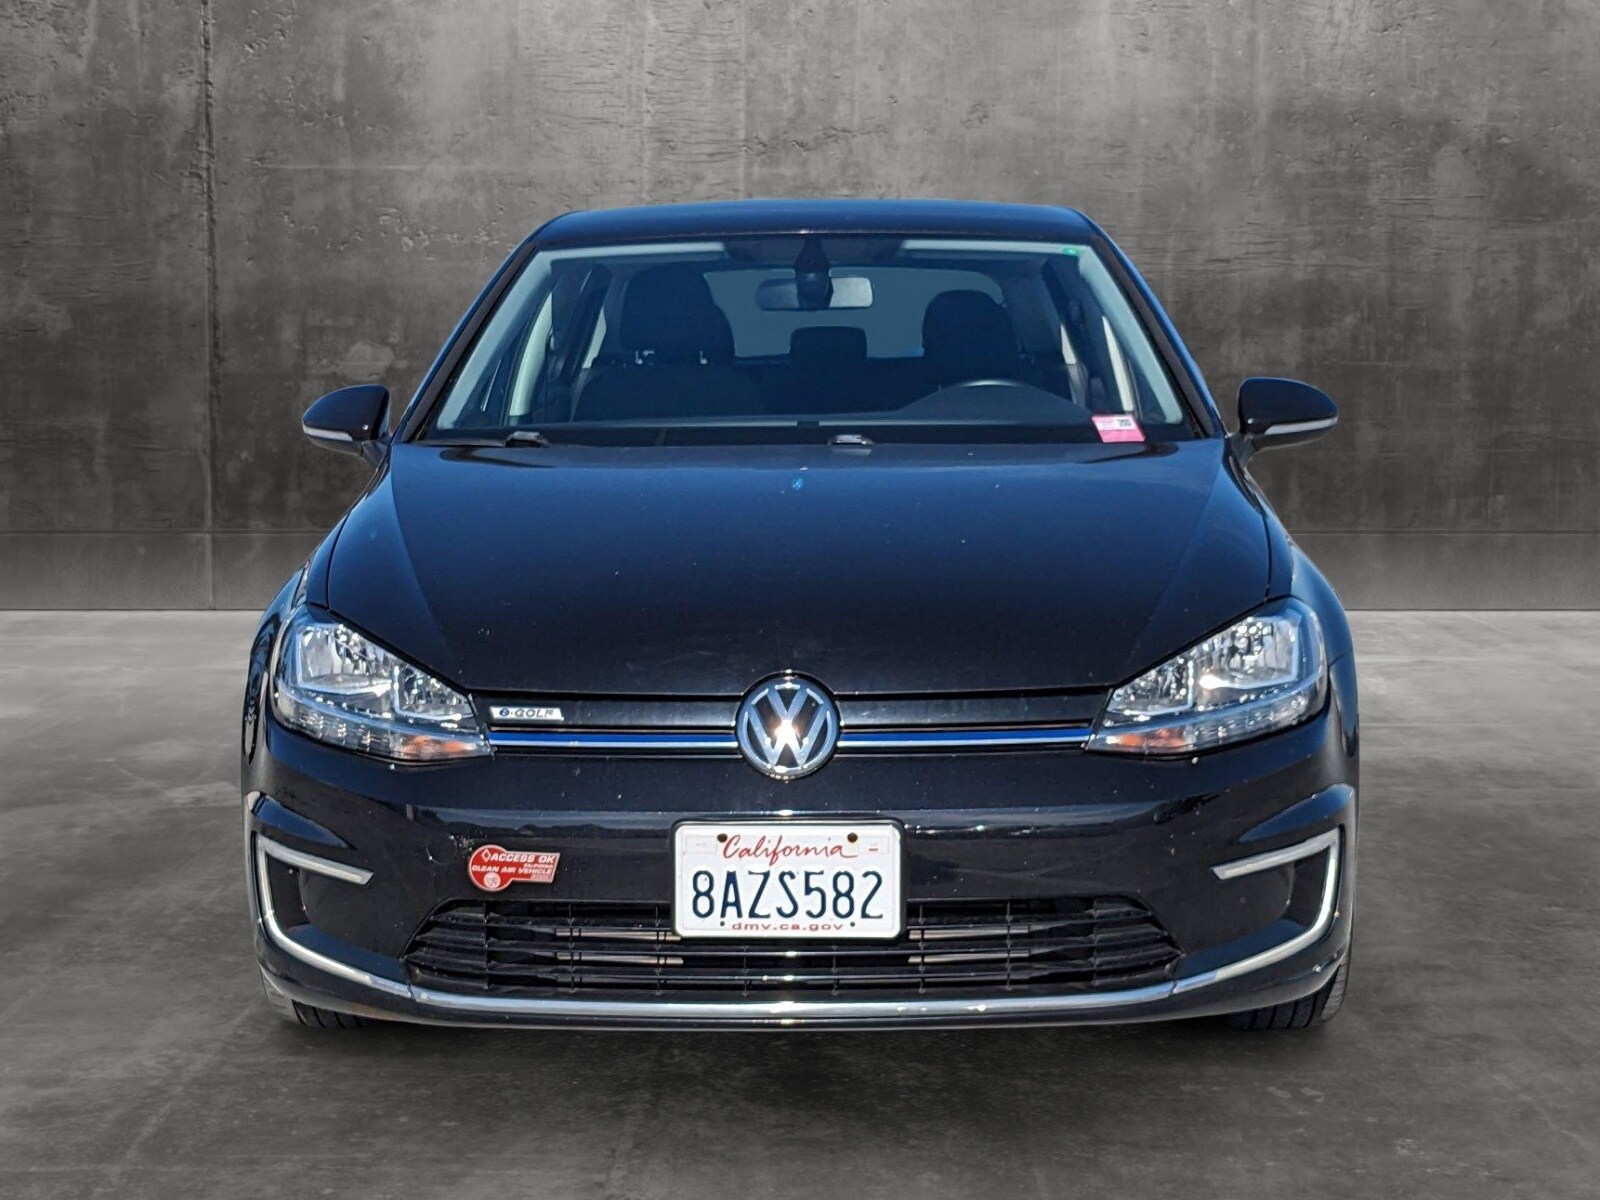 Used 2017 Volkswagen e-Golf e-Golf SE with VIN WVWKR7AU1HW953804 for sale in Mountain View, CA